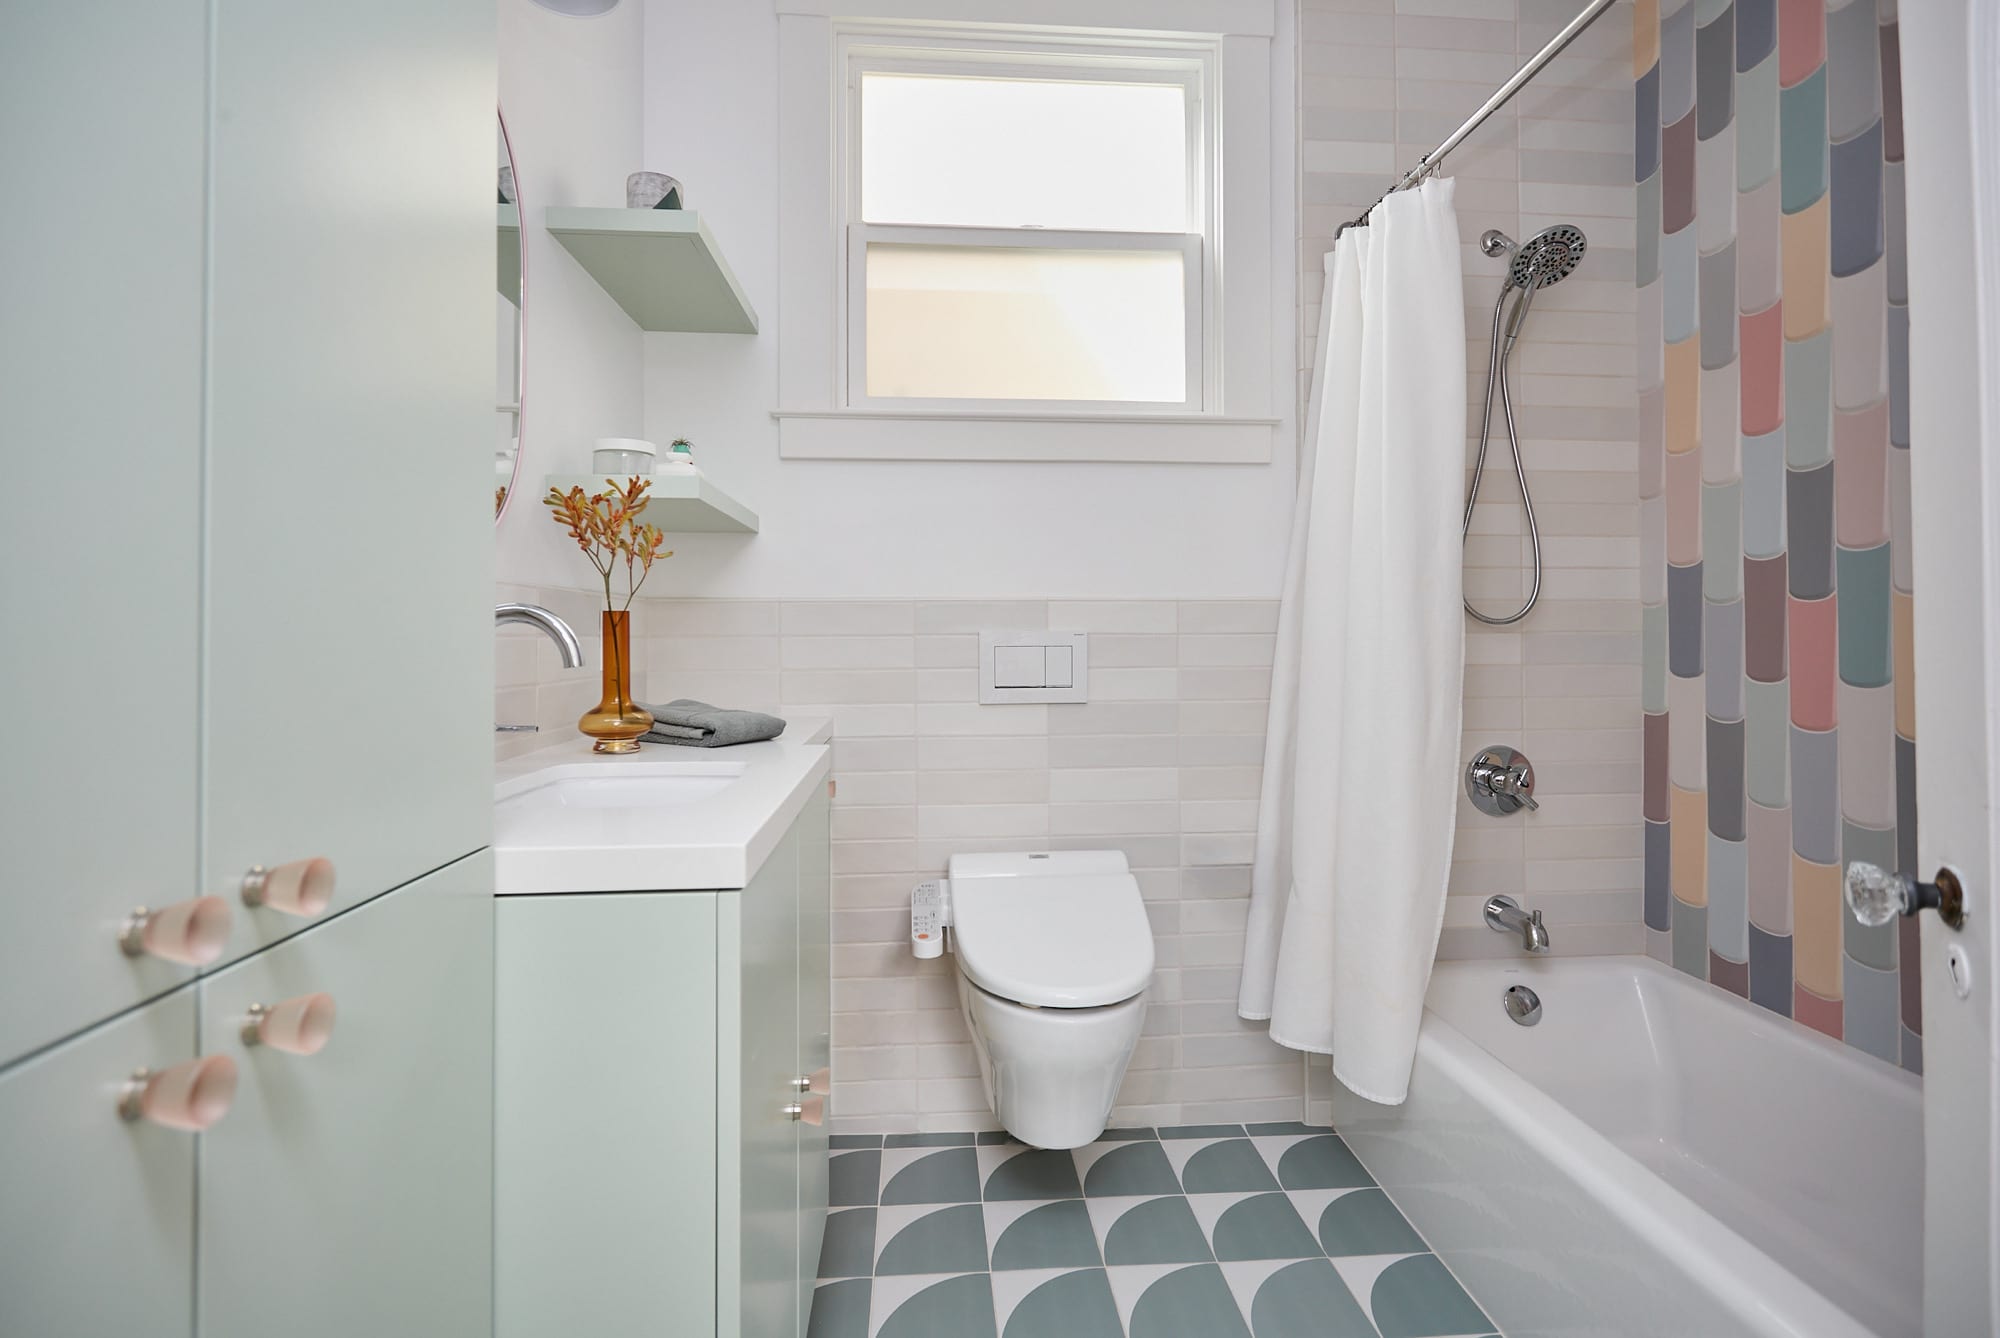 12 Design Ideas For Including Built-In Shelving In Your Shower